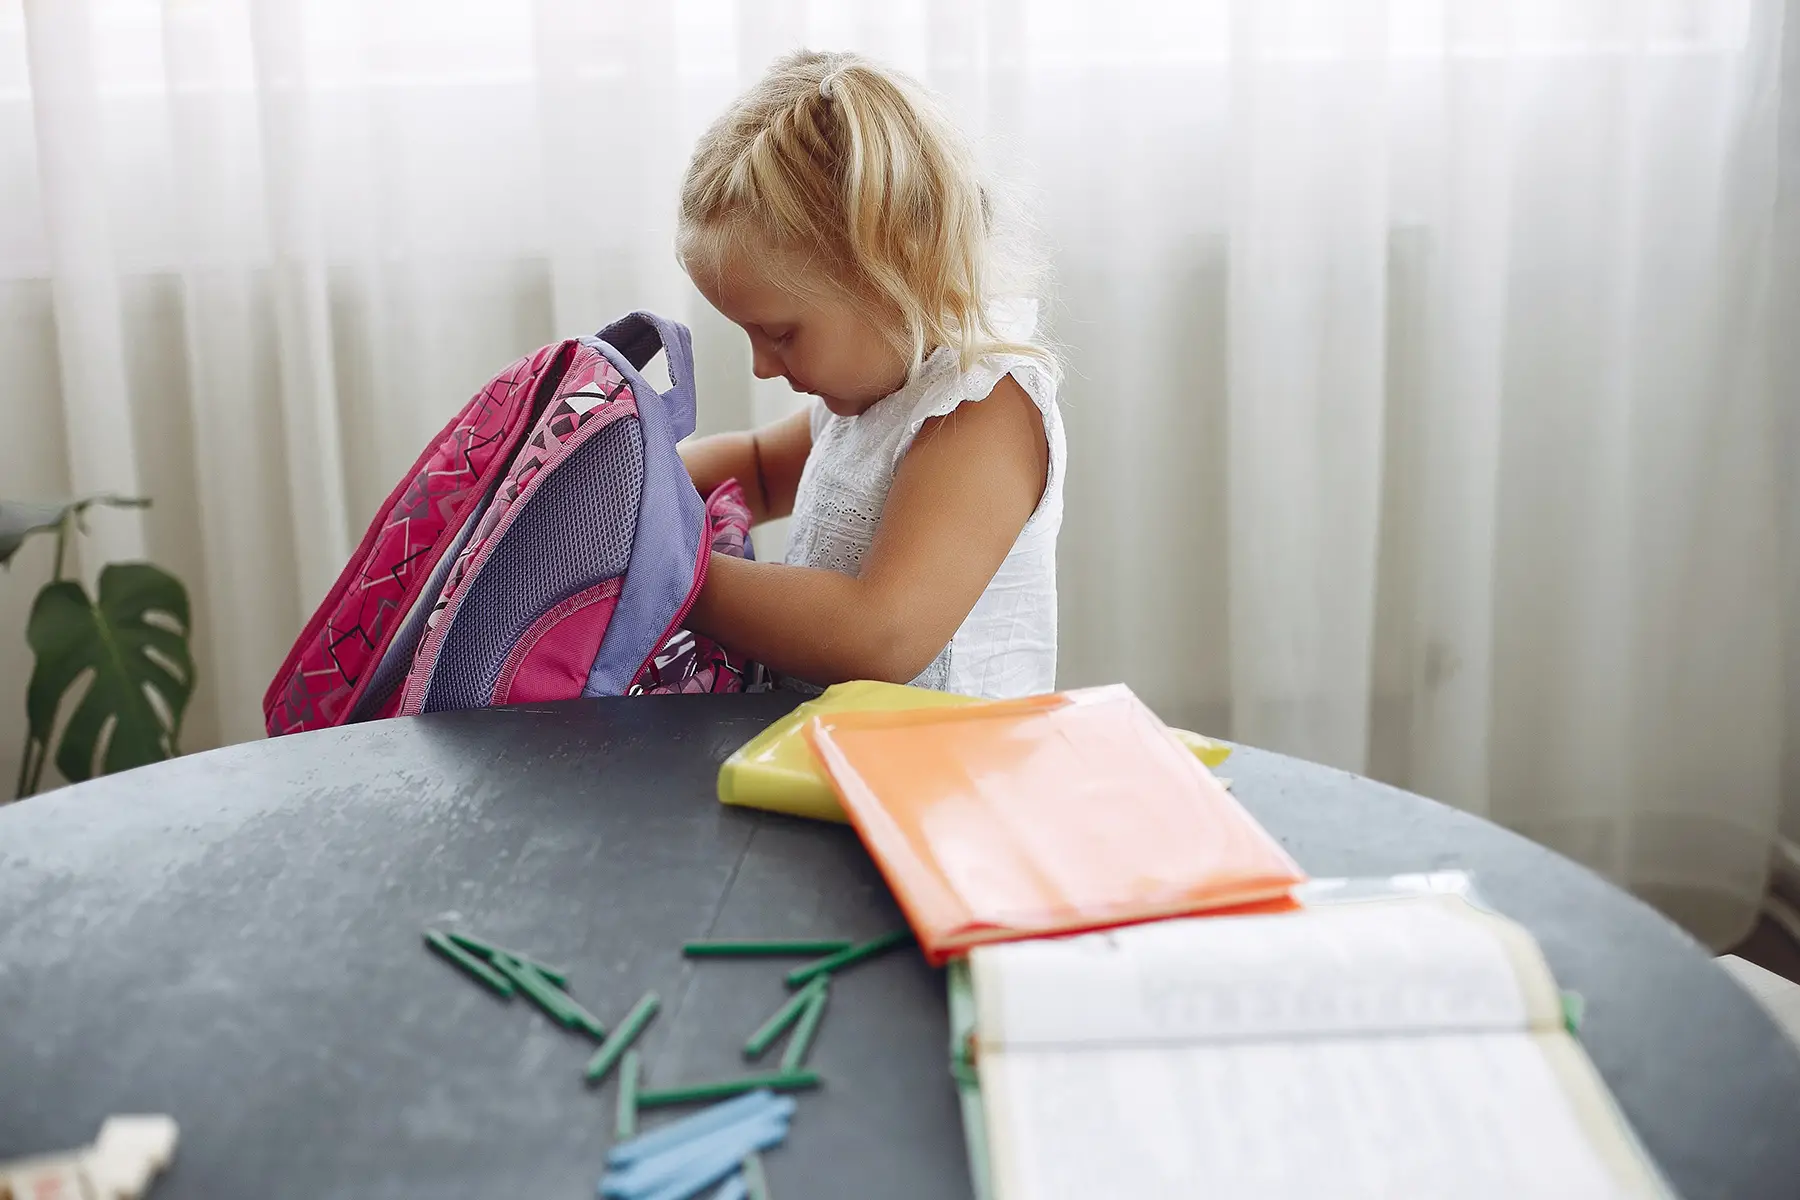 Pre-schooler (little blond girl) looking at new school bag, application forms next to her on the table